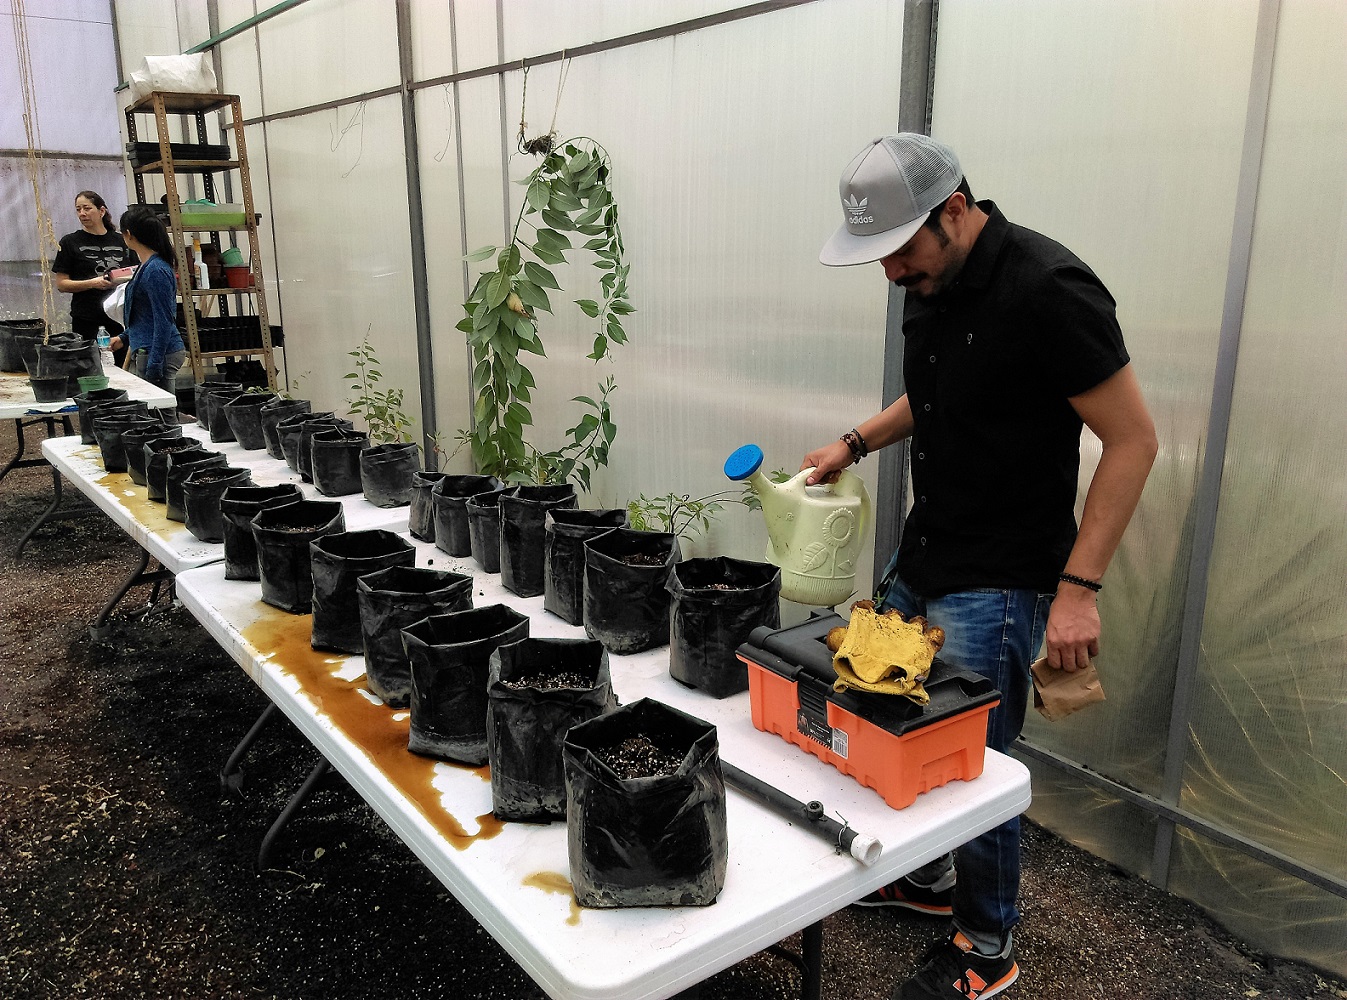 A row of white tables inside a greenhouse. On the tables are two rows of soil filled plant pots. A scientist is stood behind the bench holding a watering can and a brown paper bag